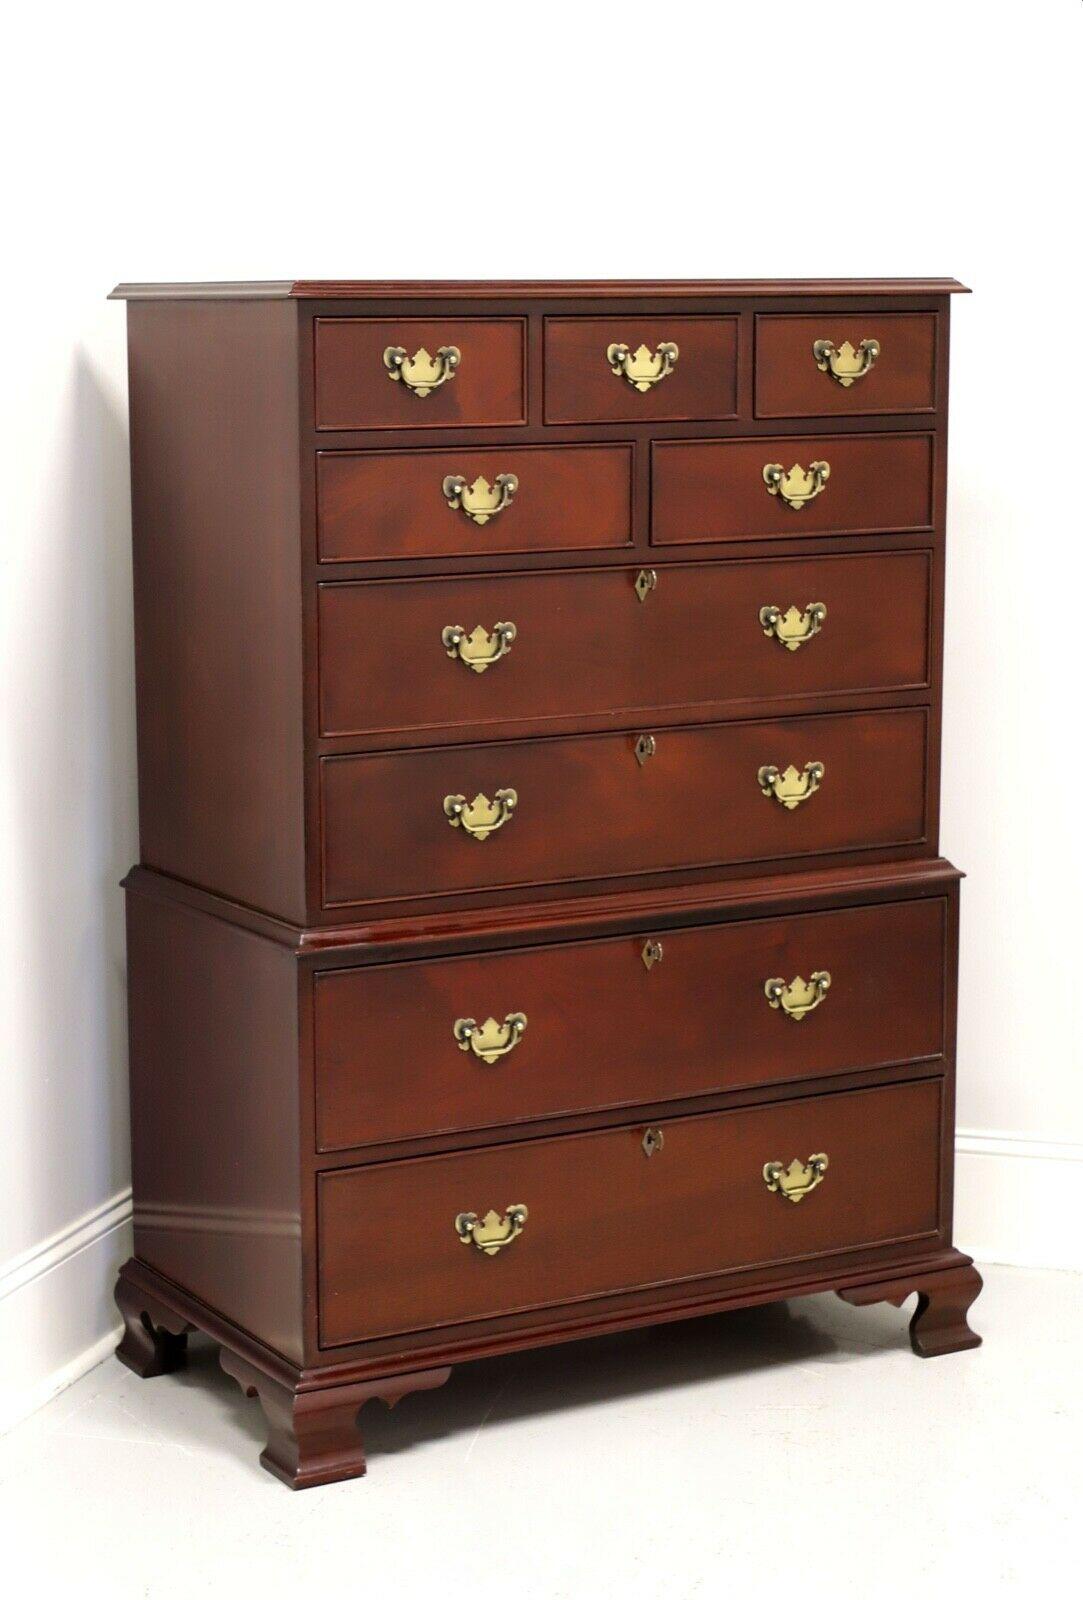 CRAFTIQUE Solid Mahogany Chippendale Chest on Chest with Ogee Feet A 5